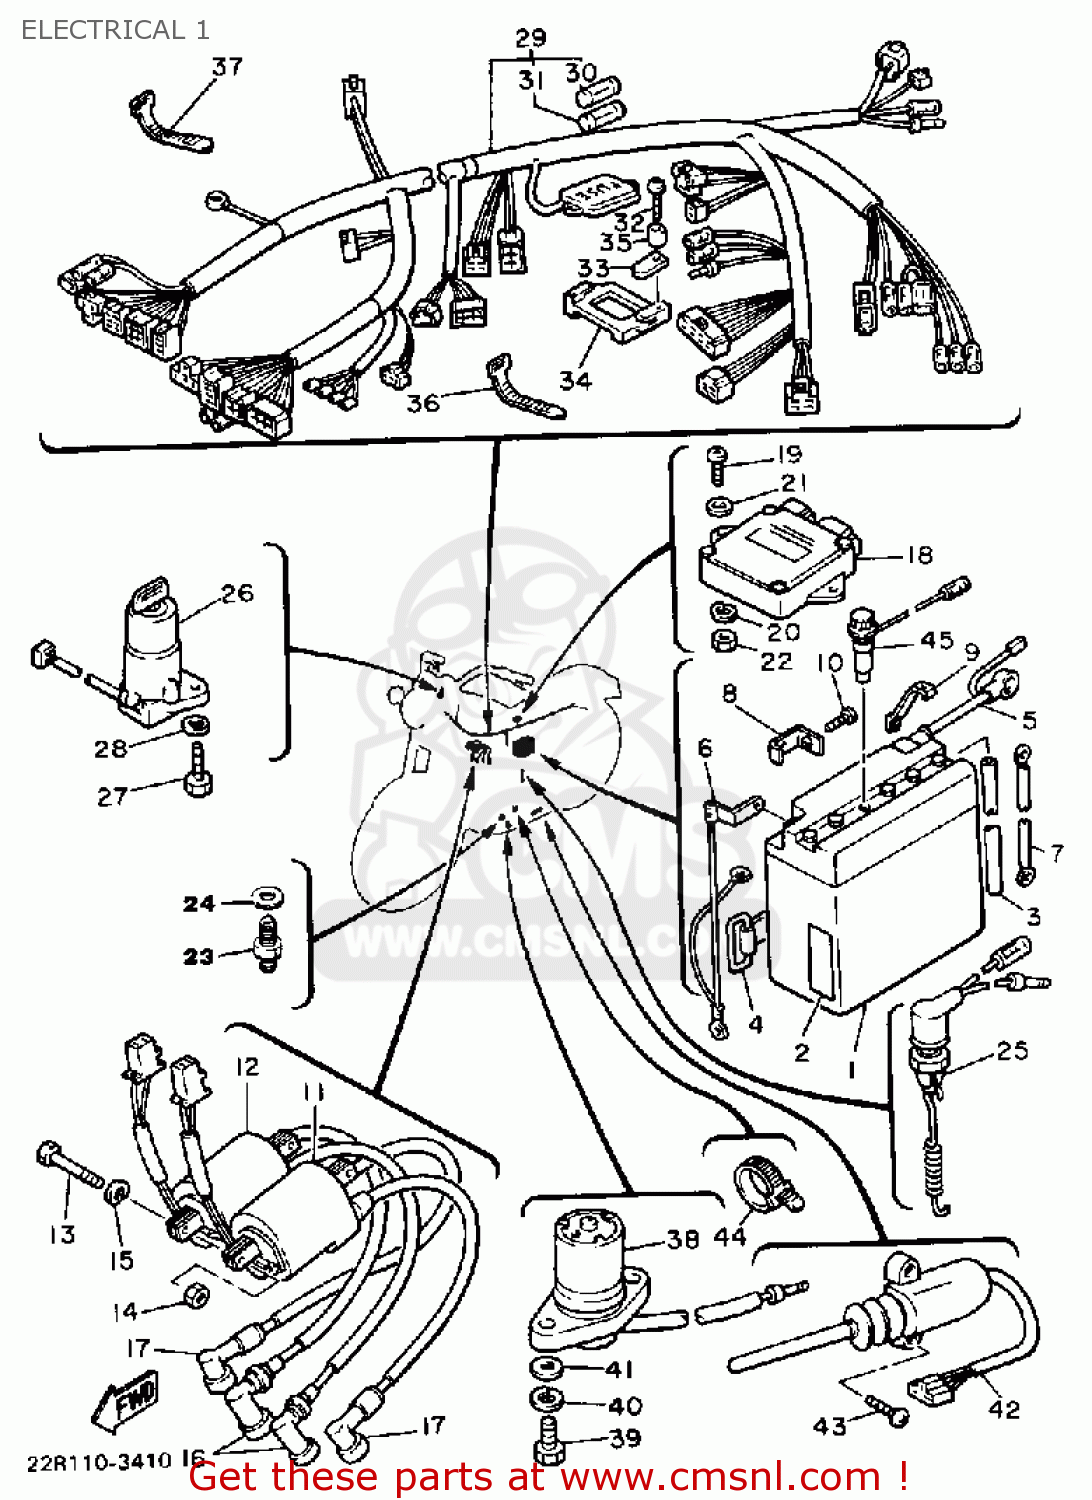 2001 Chevy Silverado Tail Light Wiring Diagram from images.cmsnl.com